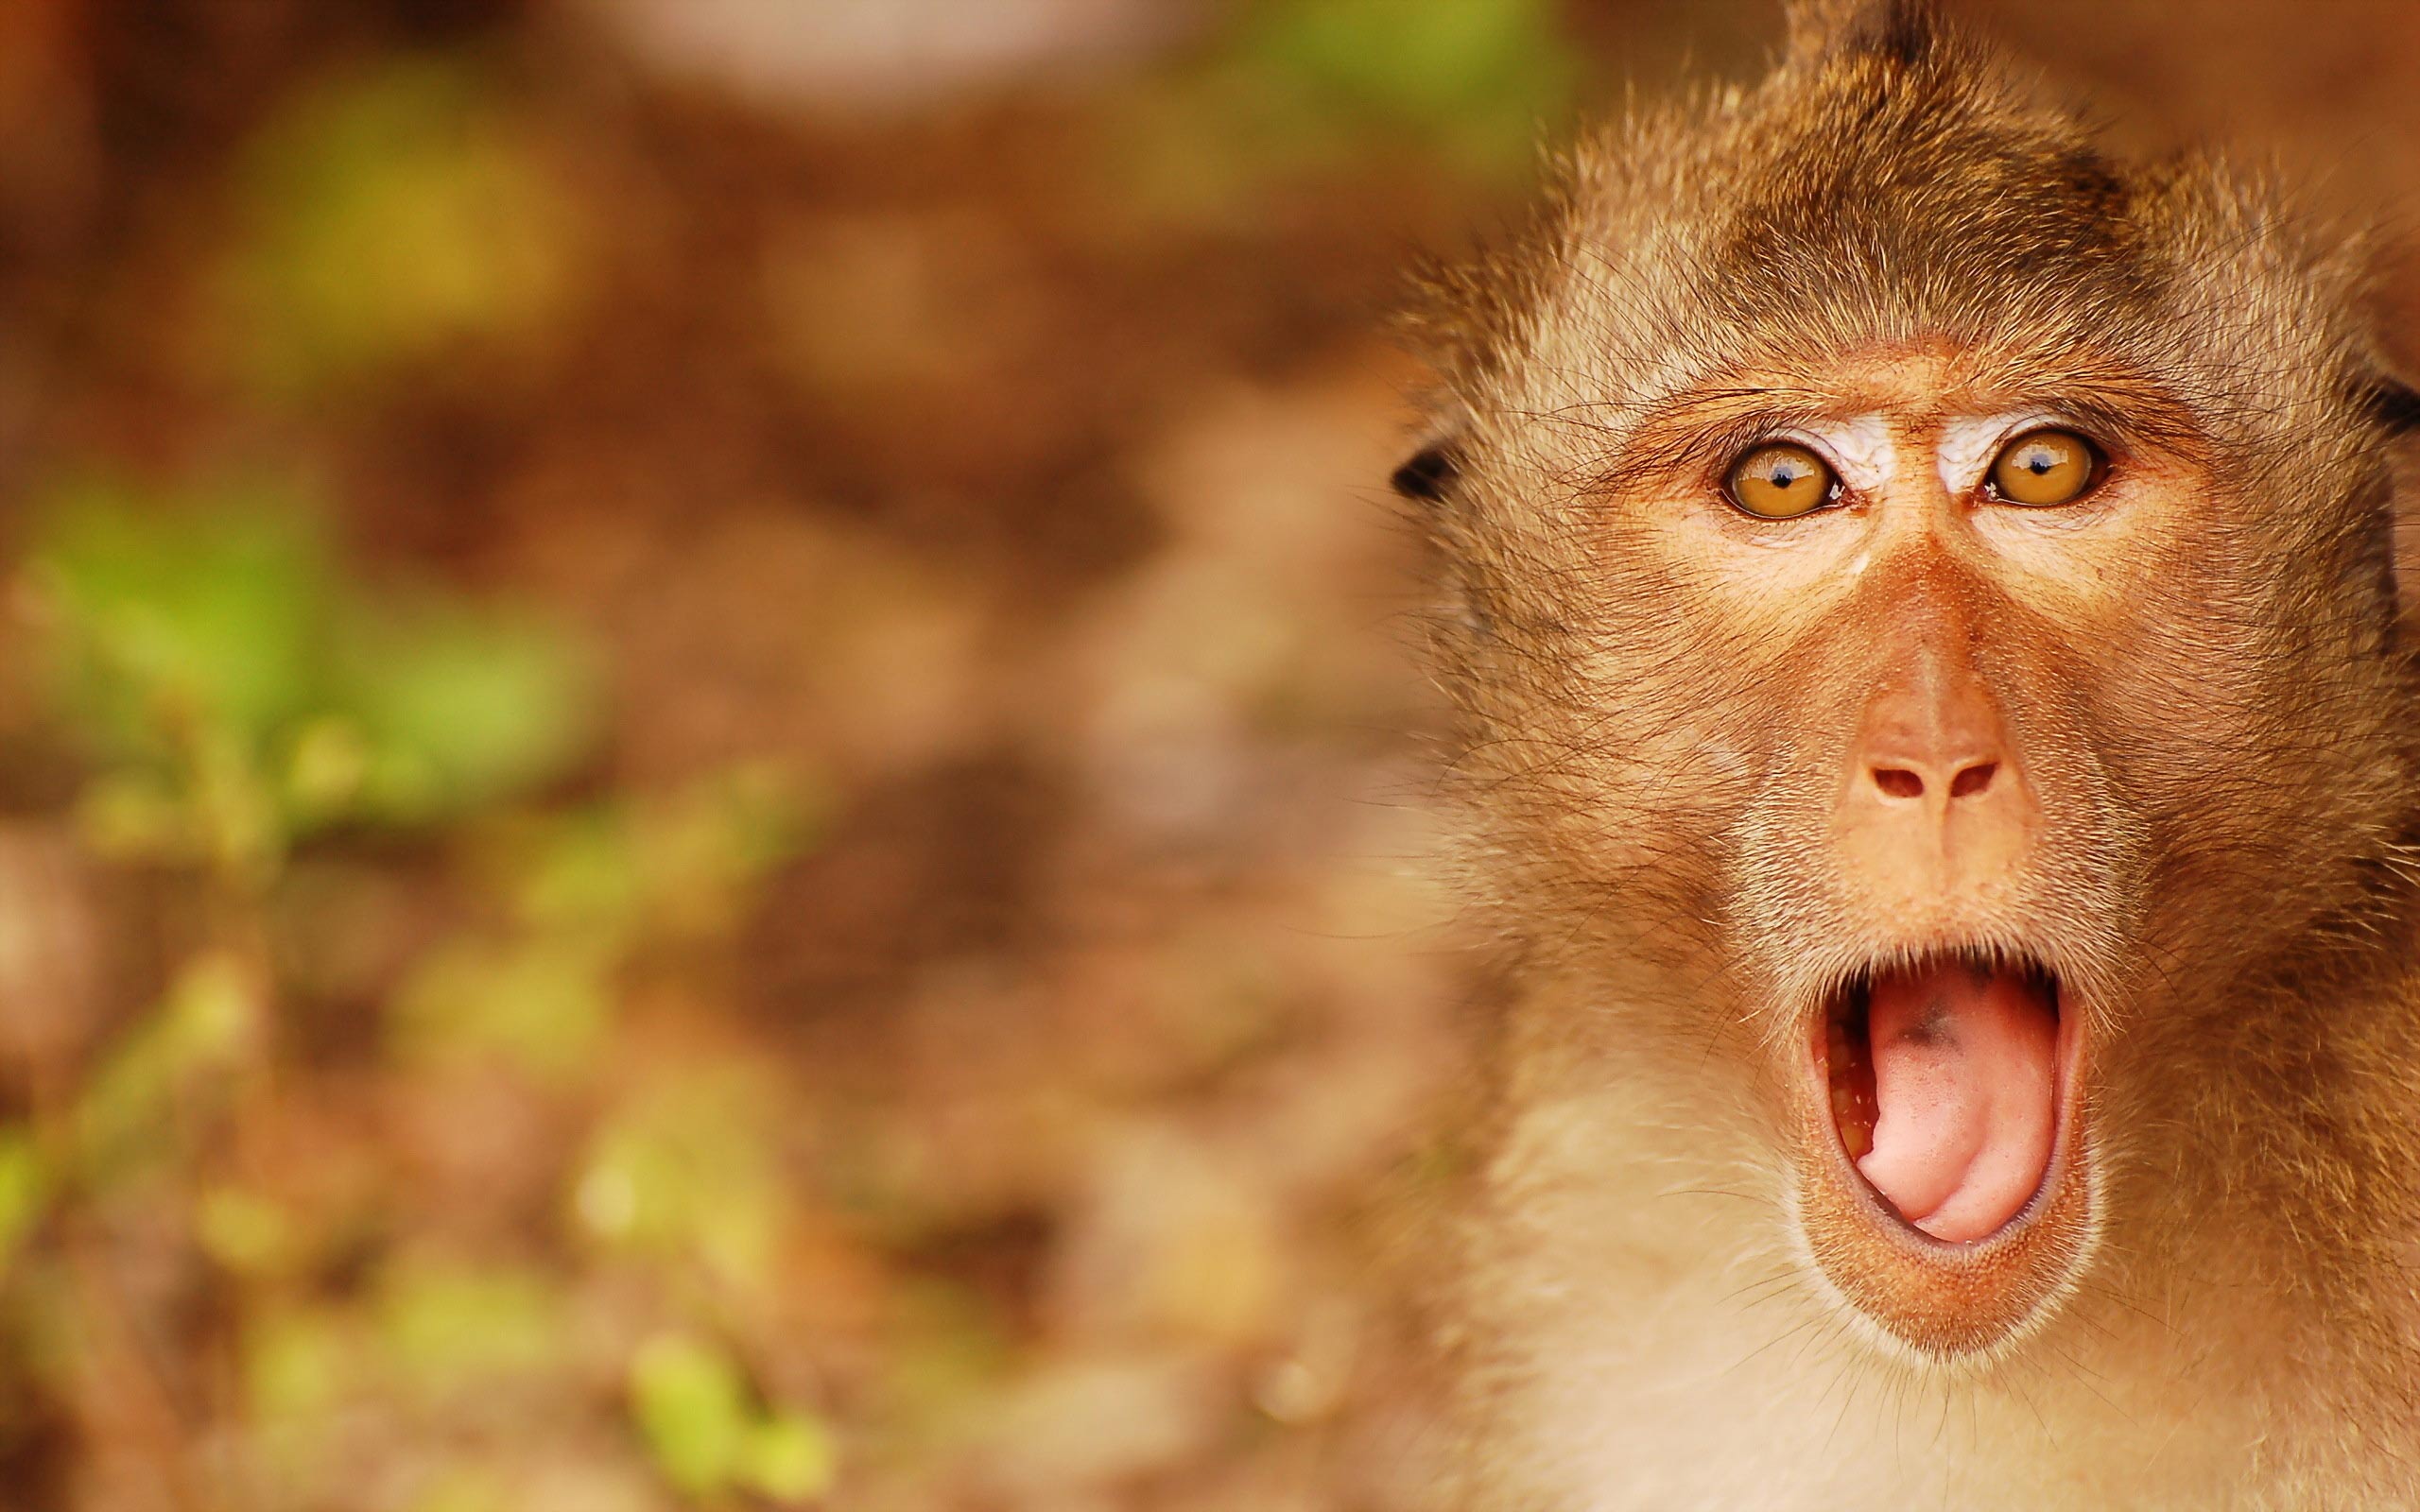 Or Share Funny Monkey Desktop Wallpaper And Background On